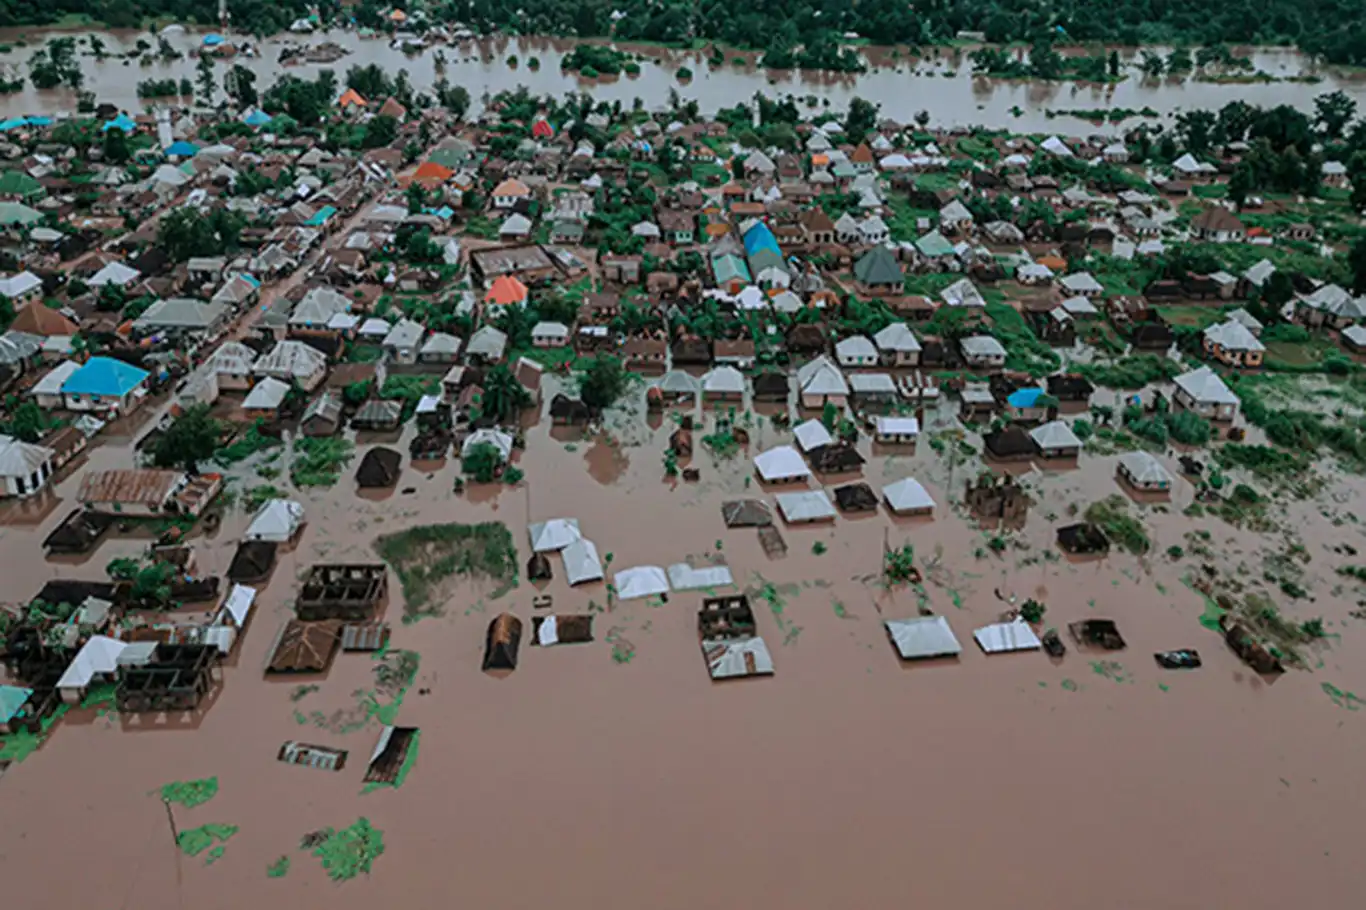 Flooding in Tanzania kills 155, affects over 200,000